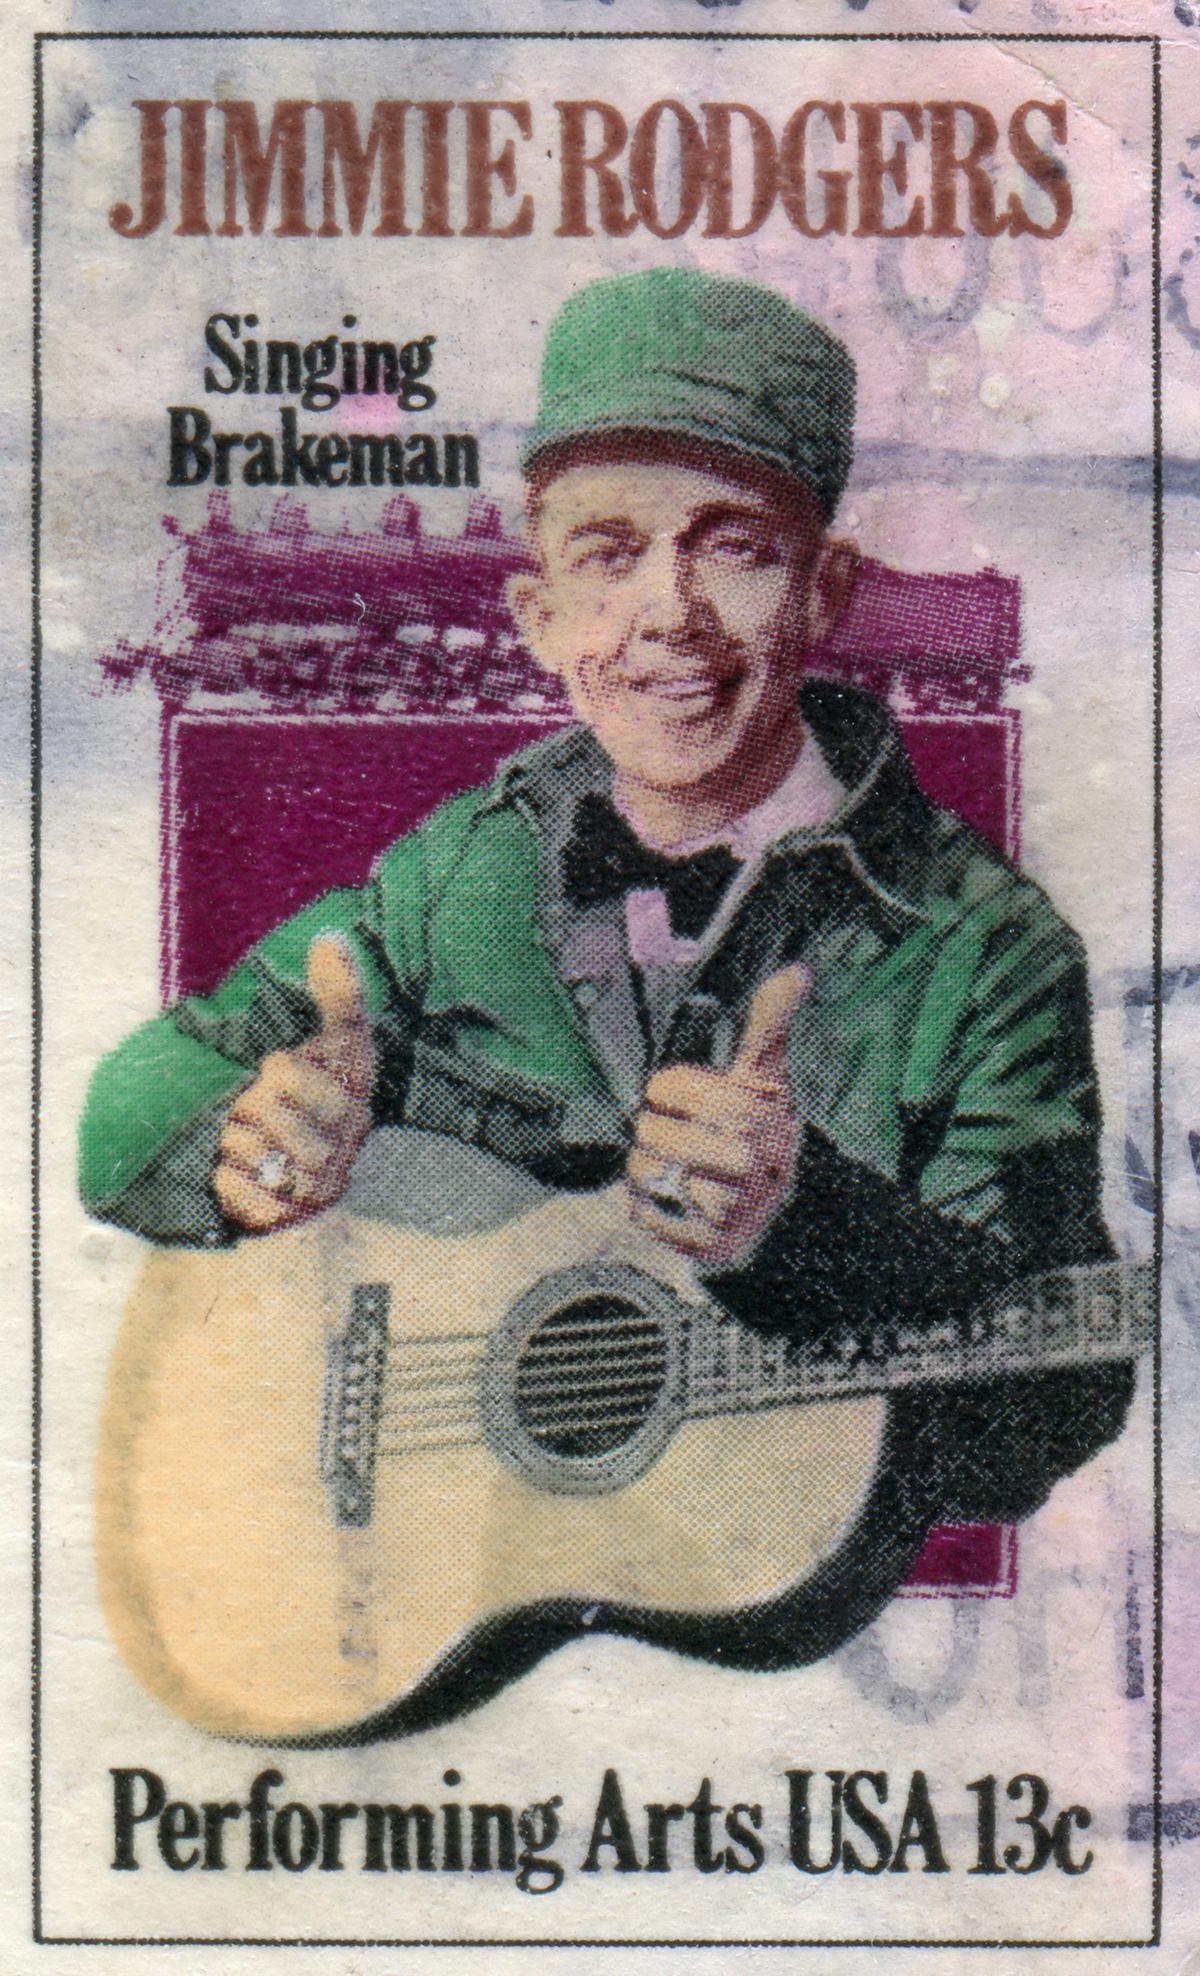 The "Singing Brakeman." The Father of Country Music, Jimmie Rodgers, printed on a postage stamp, circa 1978. (Sergey Kohl/Shutterstock)